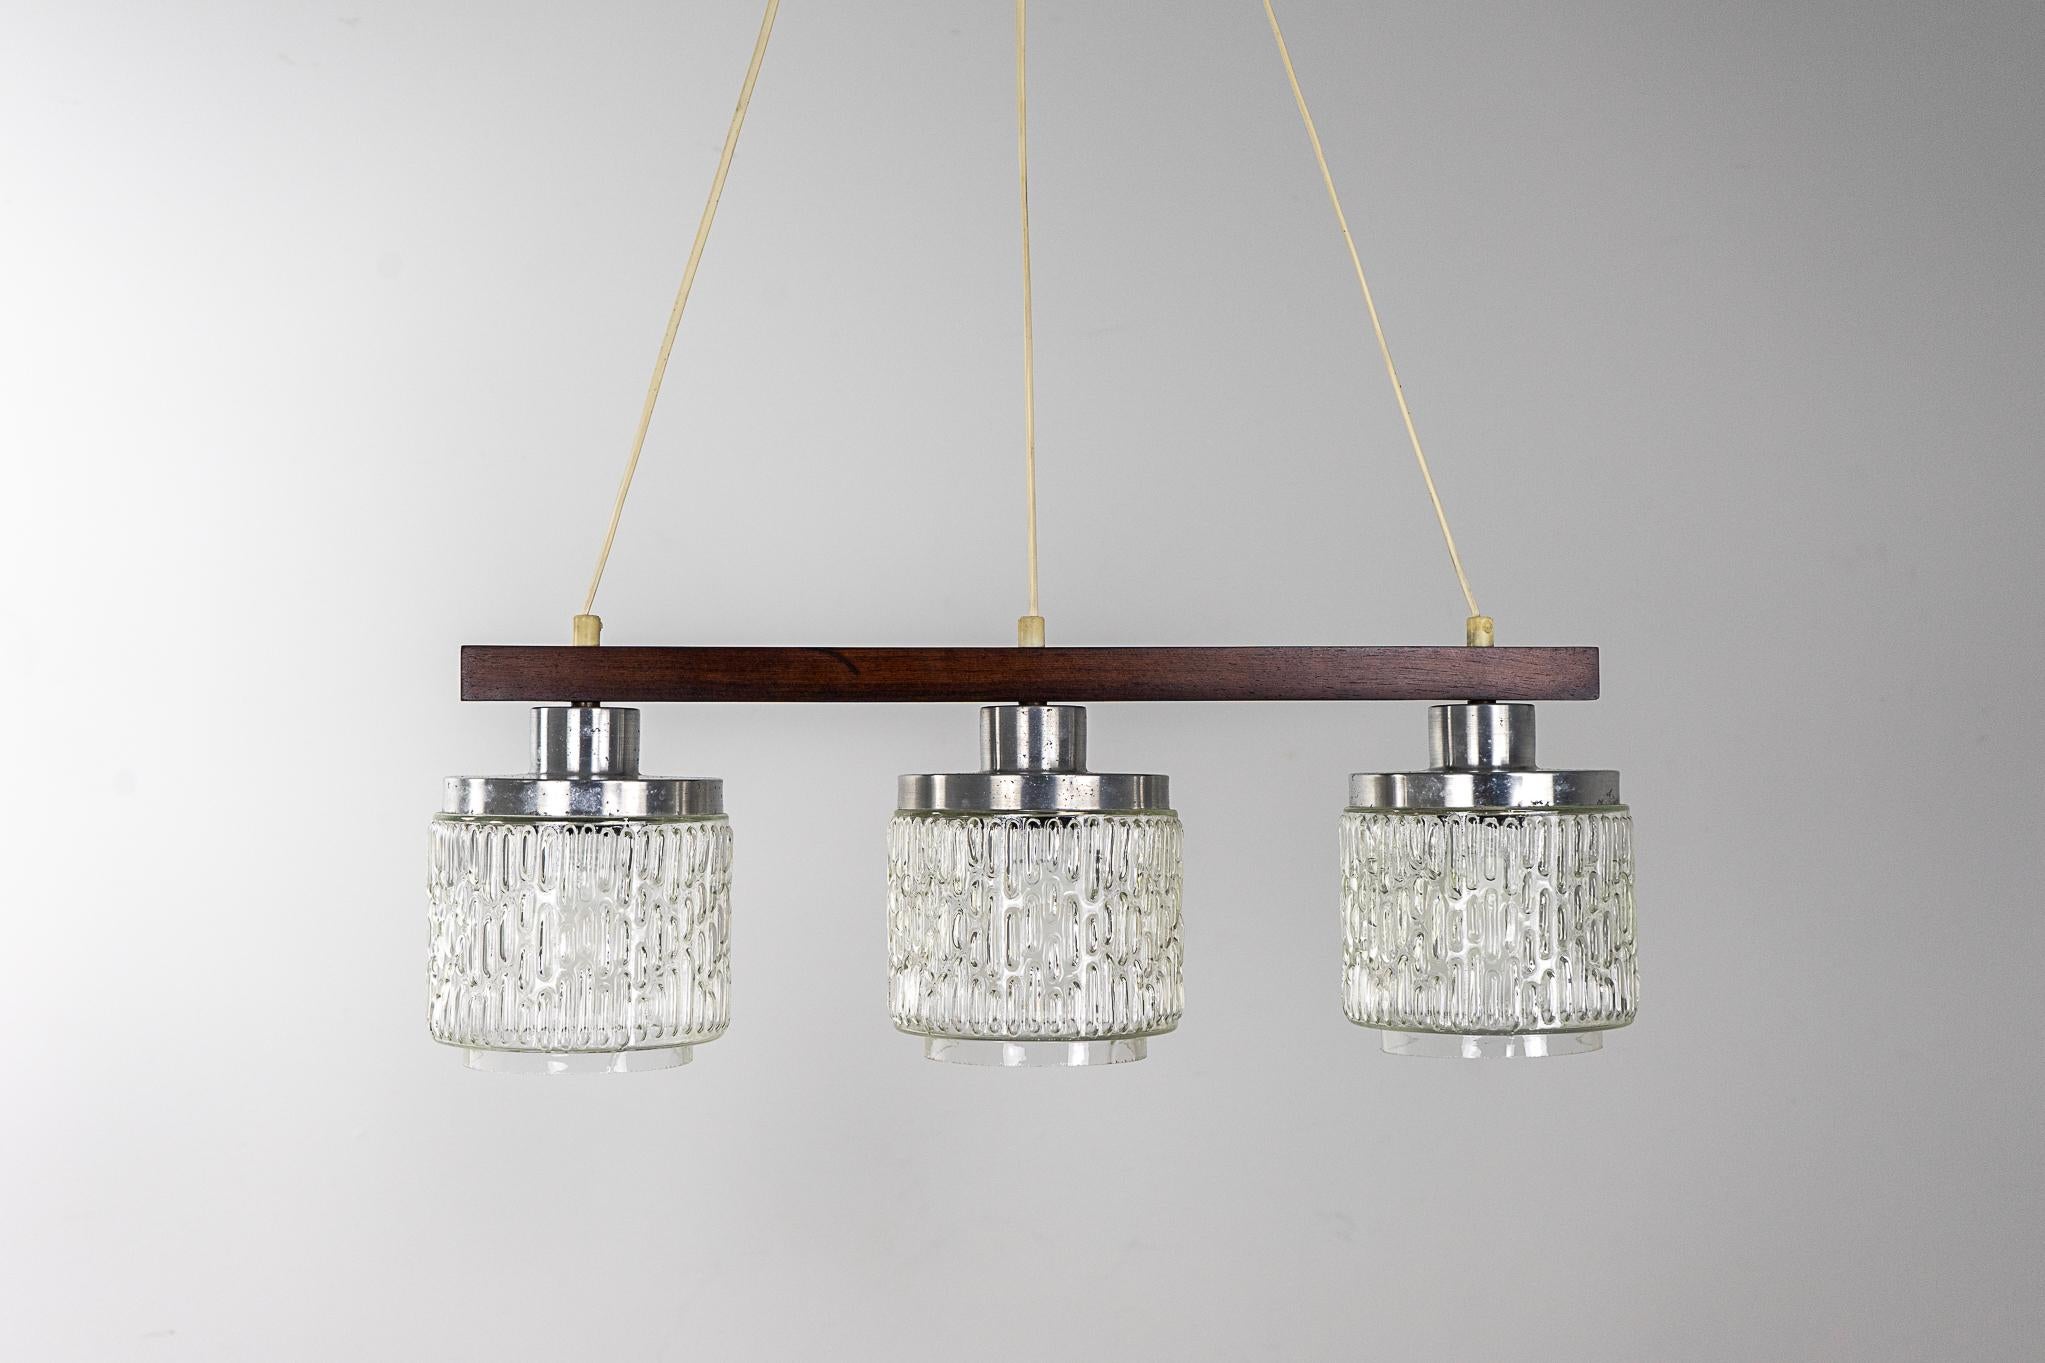 Rosewood and glass Danish modern pendant light, circa 1960's. Triple light chandelier with original heavily textured glass shades and silver metal caps. Light the space you love!

Please inquire for international and remote shipping rates.